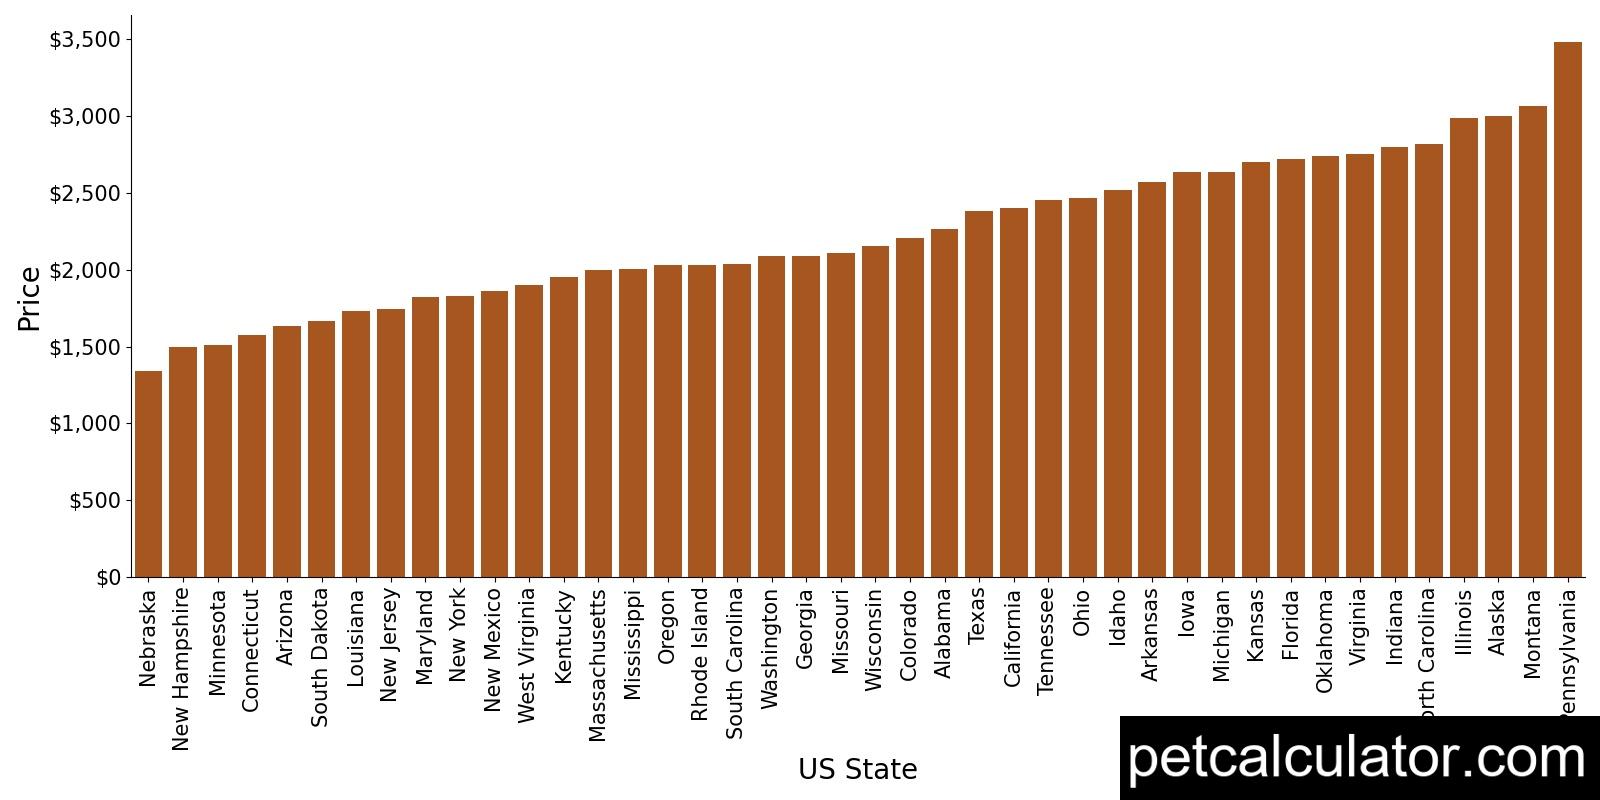 Price of Miniature Poodle by US State 